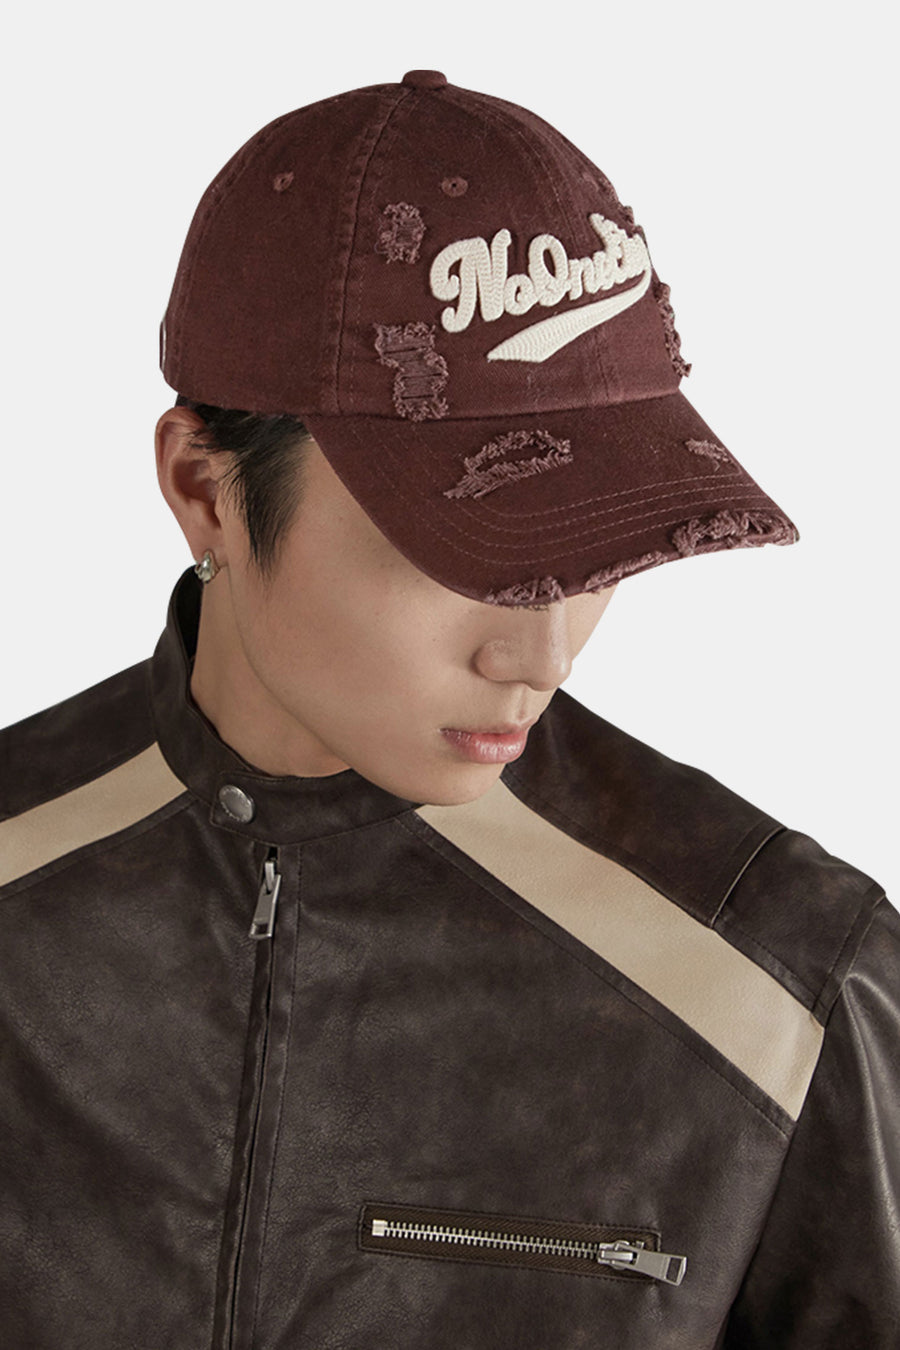 CHUU Distressed Lettering Ball Cap